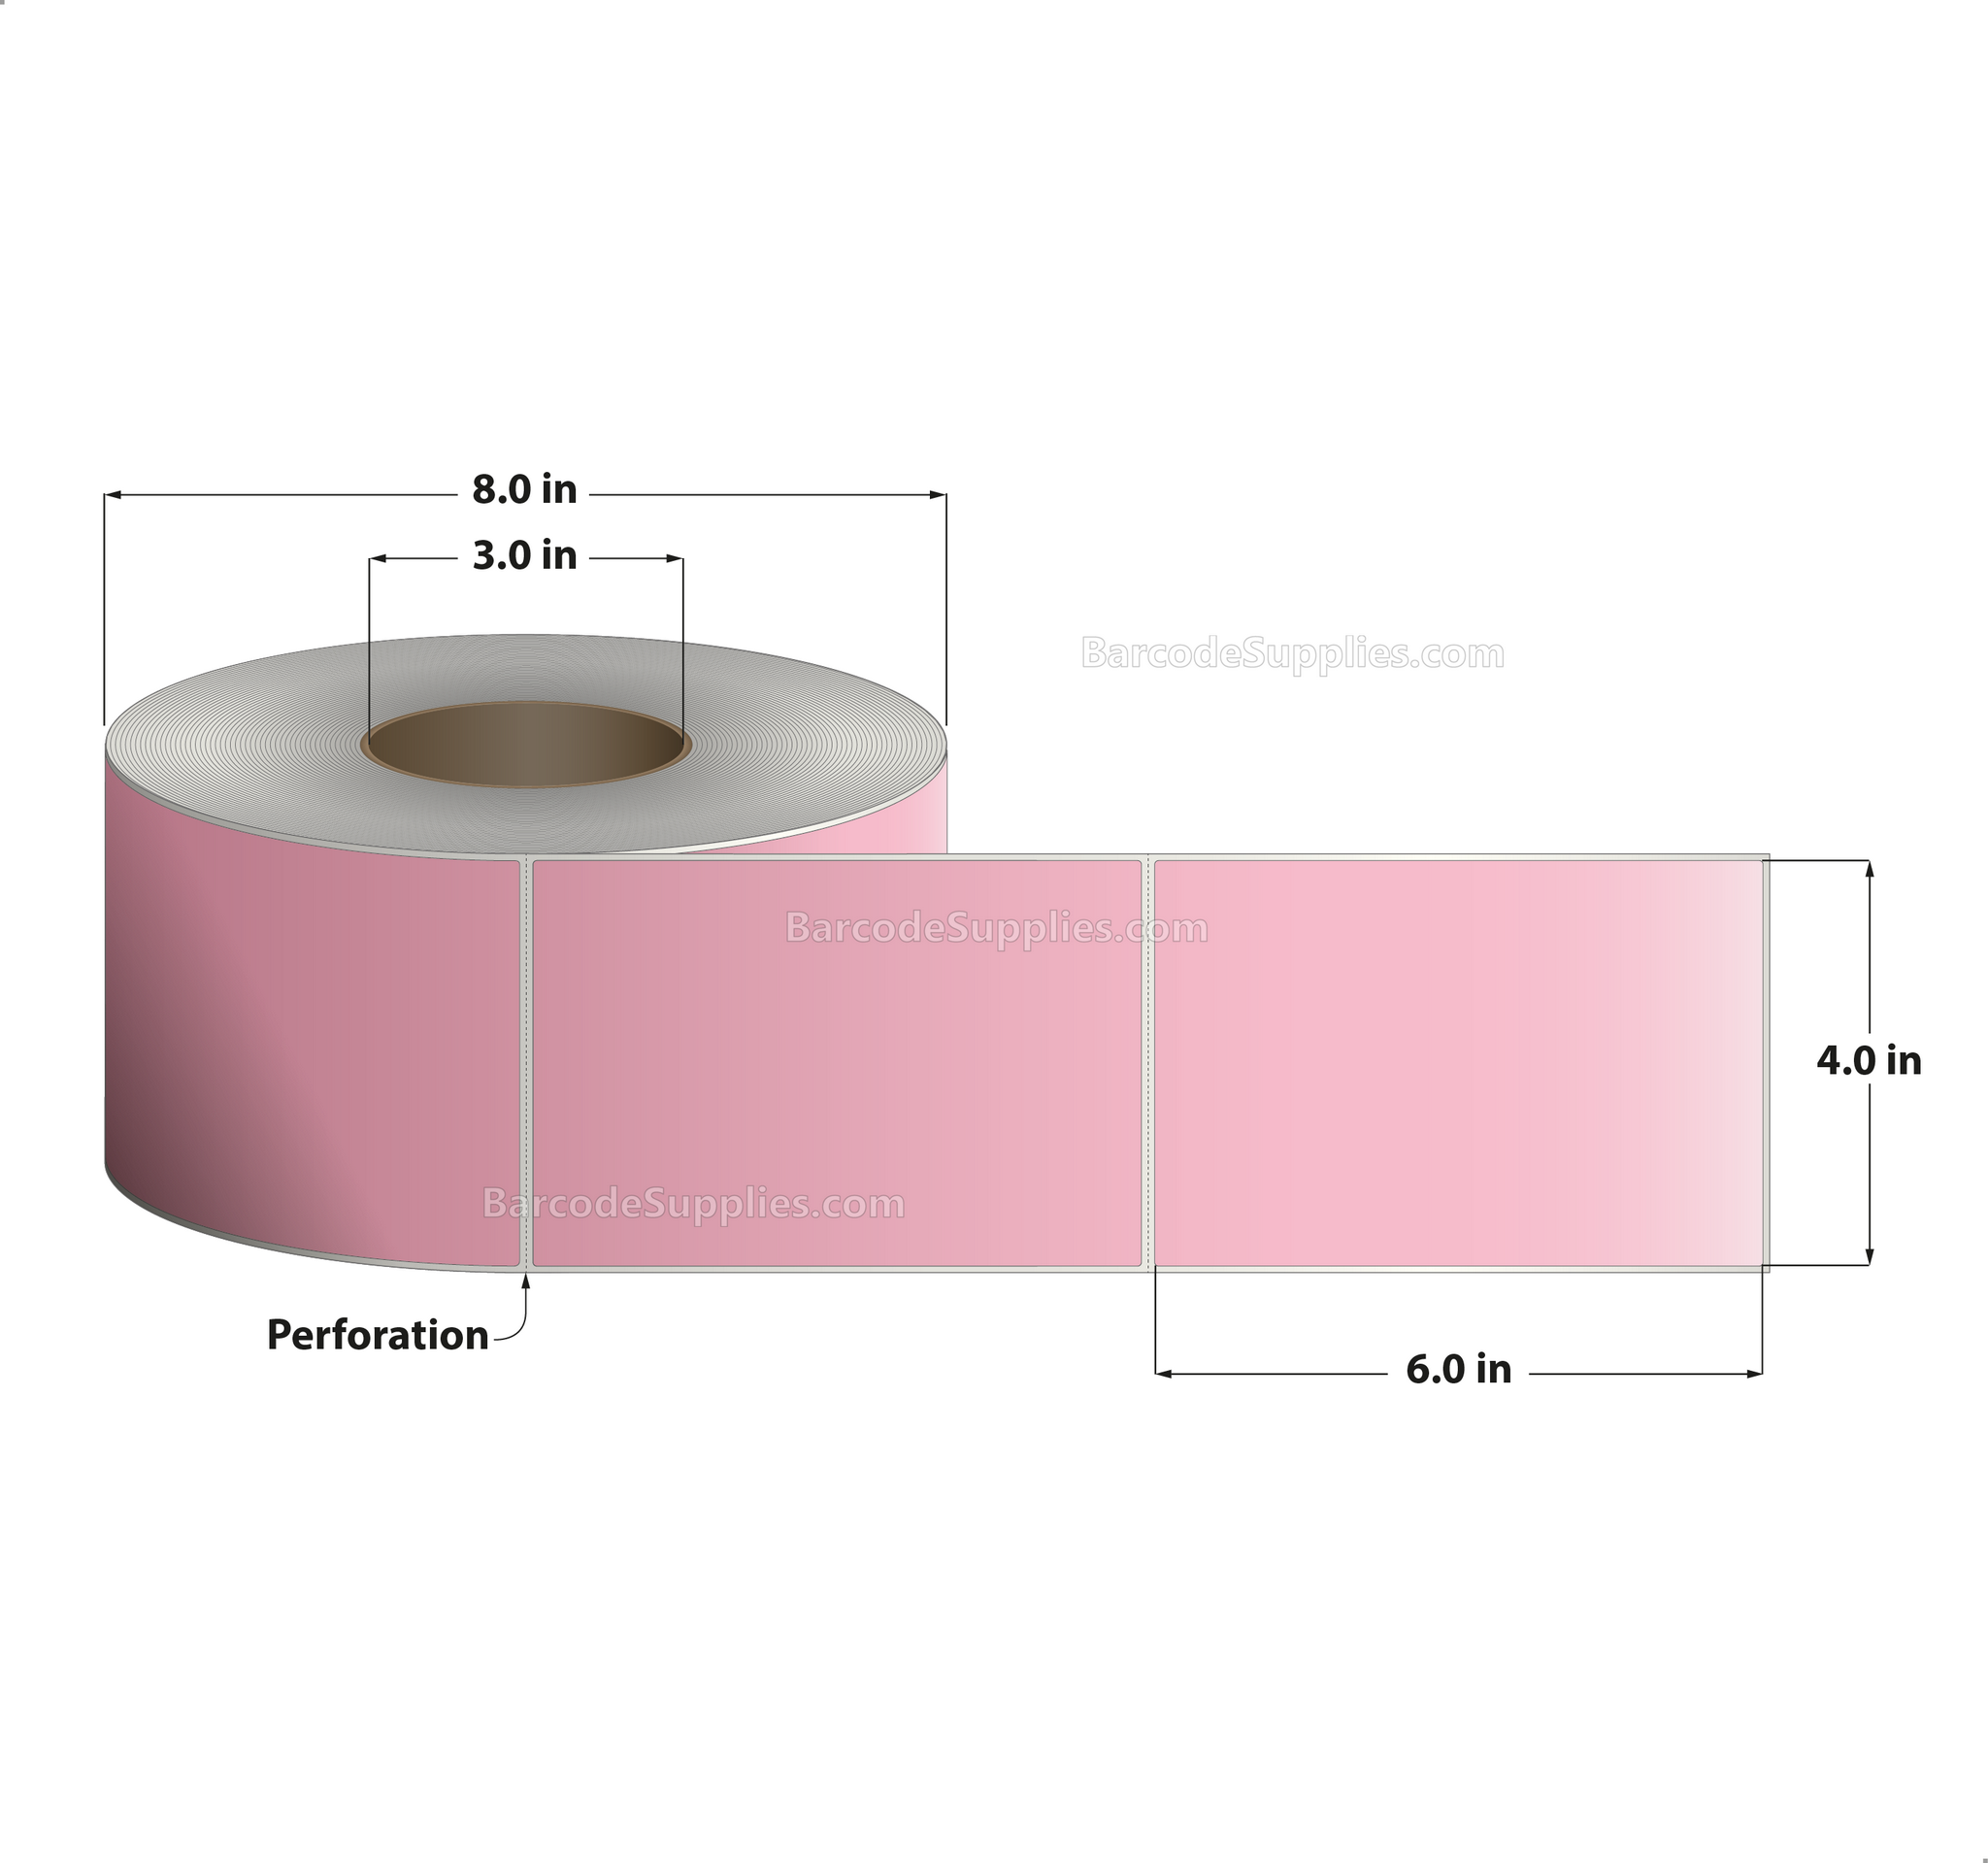 4 x 6 Thermal Transfer 196 Pink Labels With Permanent Acrylic Adhesive - Perforated - 1000 Labels Per Roll - Carton Of 4 Rolls - 4000 Labels Total - MPN: TH46-1PP